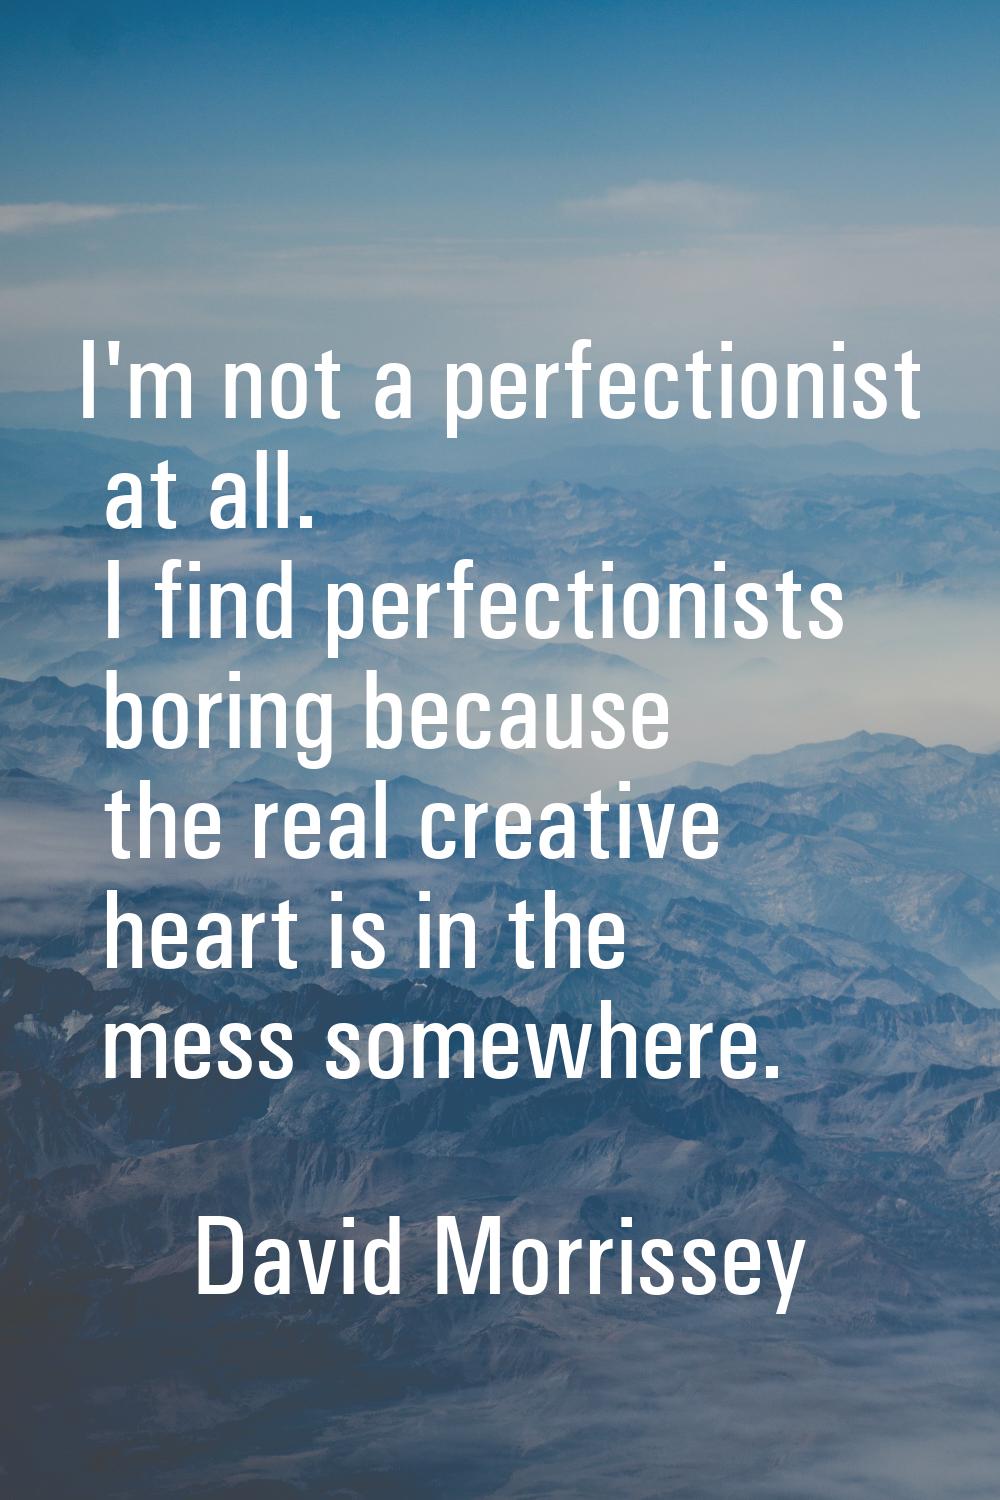 I'm not a perfectionist at all. I find perfectionists boring because the real creative heart is in 